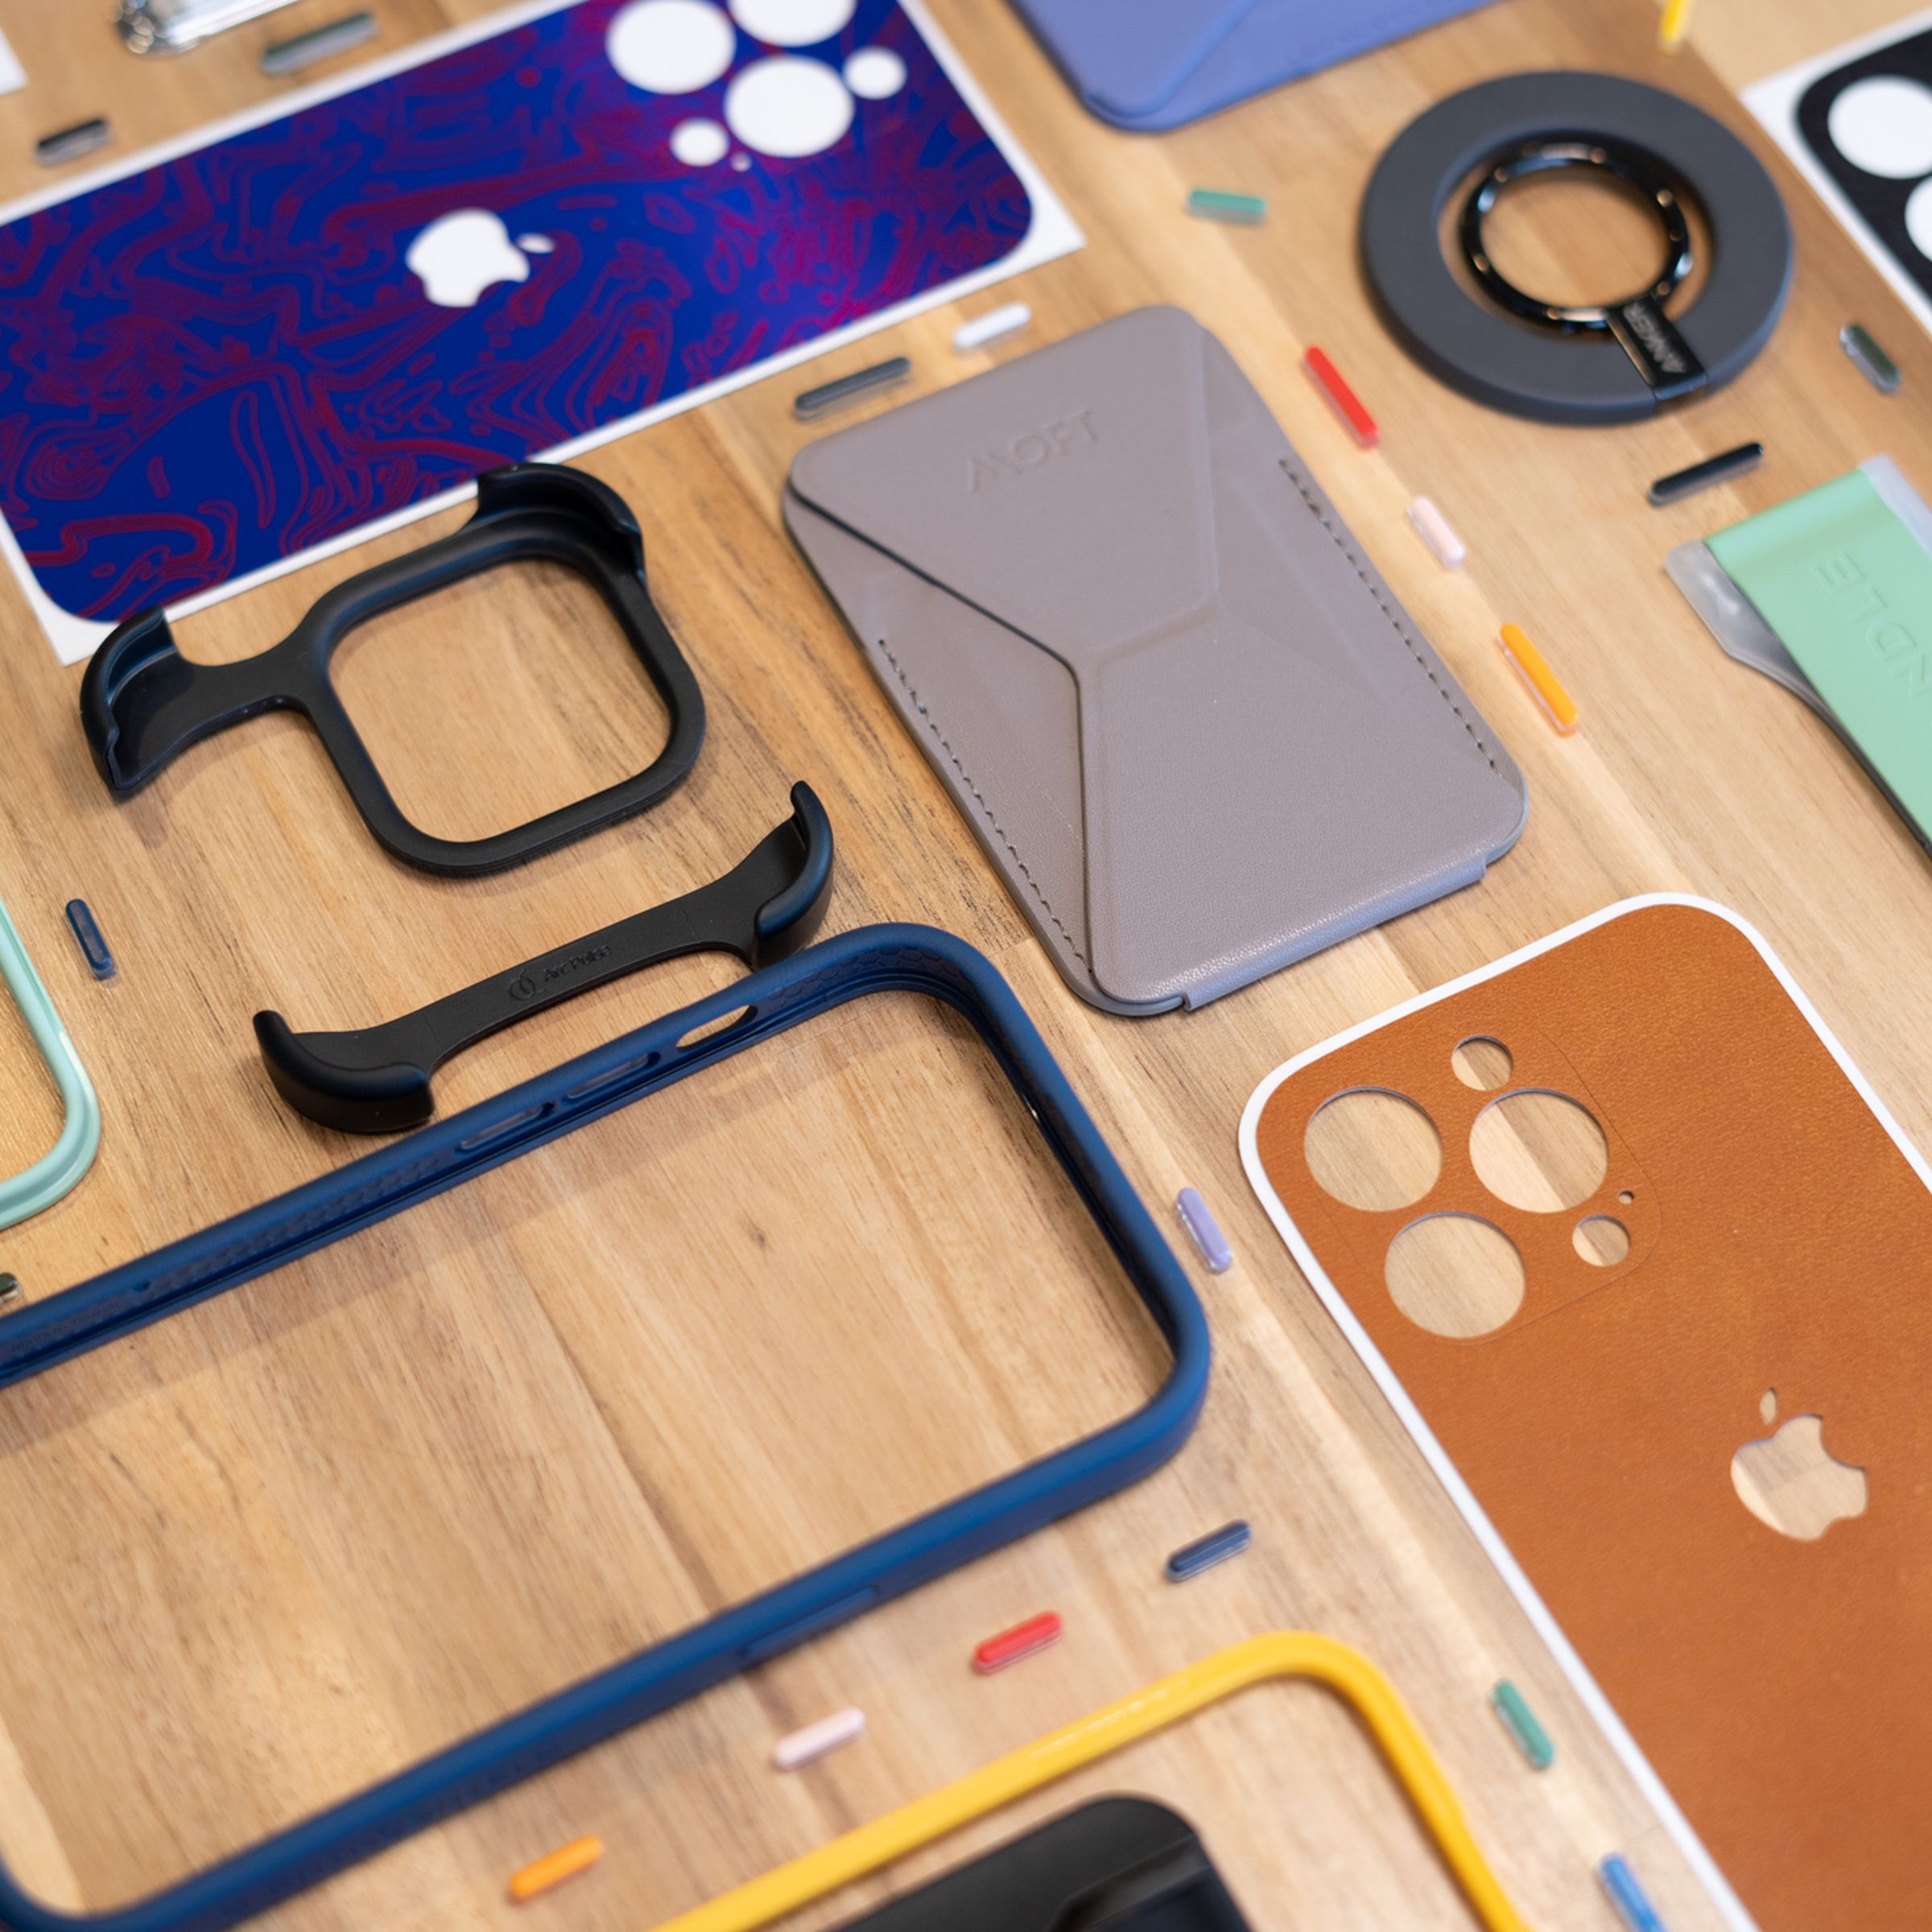 A set of wallets, grips, and colorful phone bumper cases with interchangeable buttons laid out on a table.